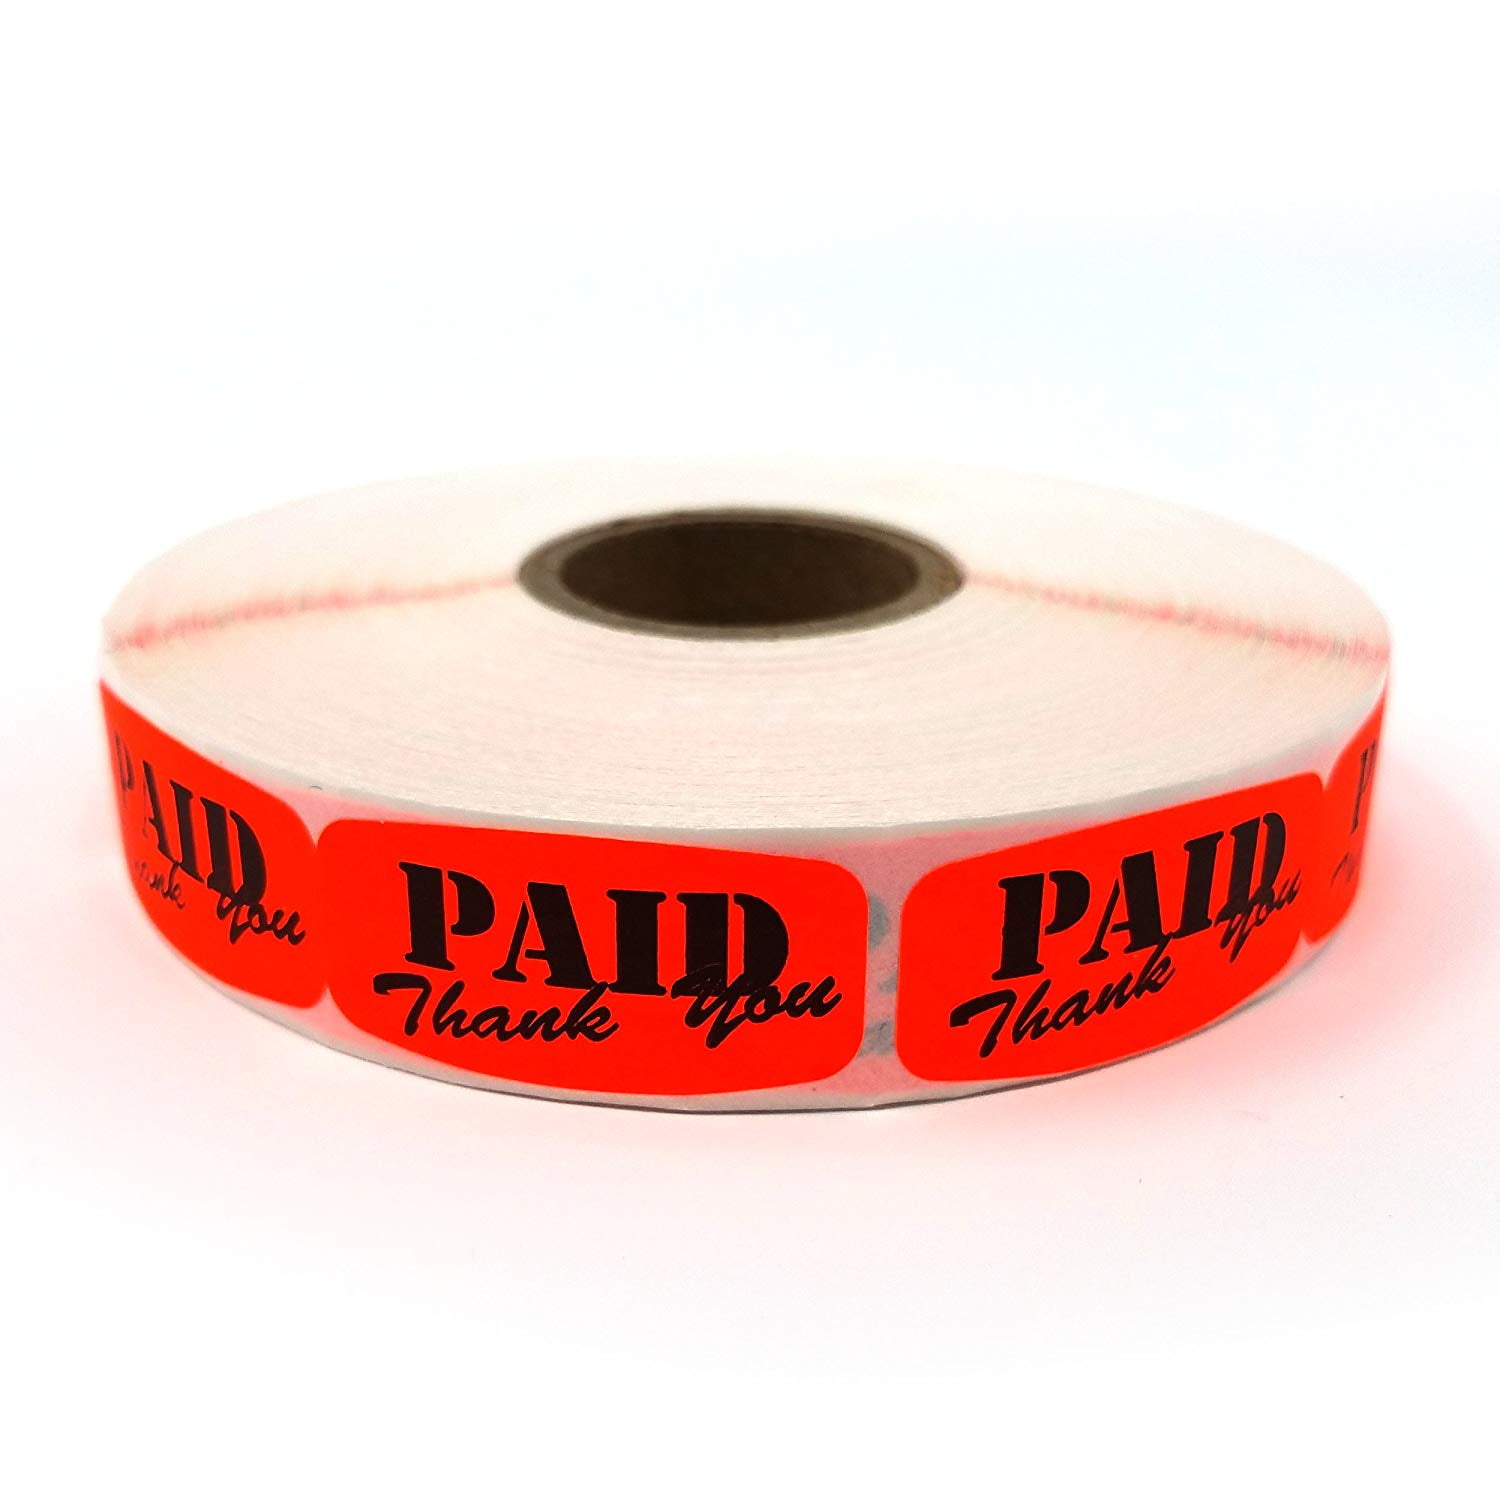 Paid Fl Red   LABELS 1000 PER ROLL GREAT STICKERS